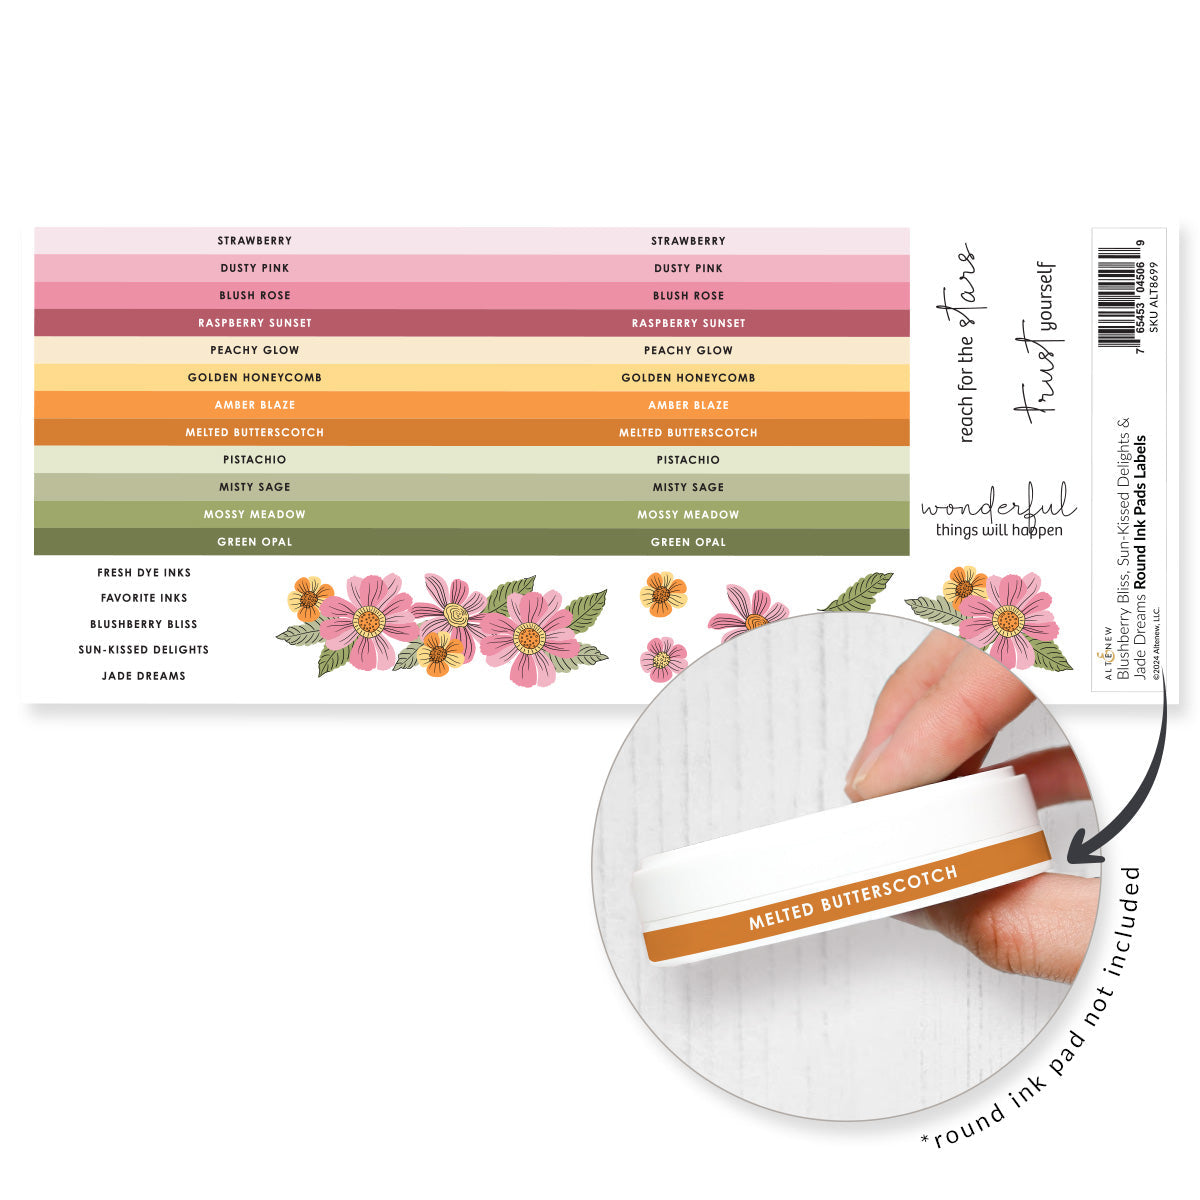 Organizational Label Round Ink Pads Label Set - Blushberry Bliss, Sun-Kissed Delights, Jade Dreams